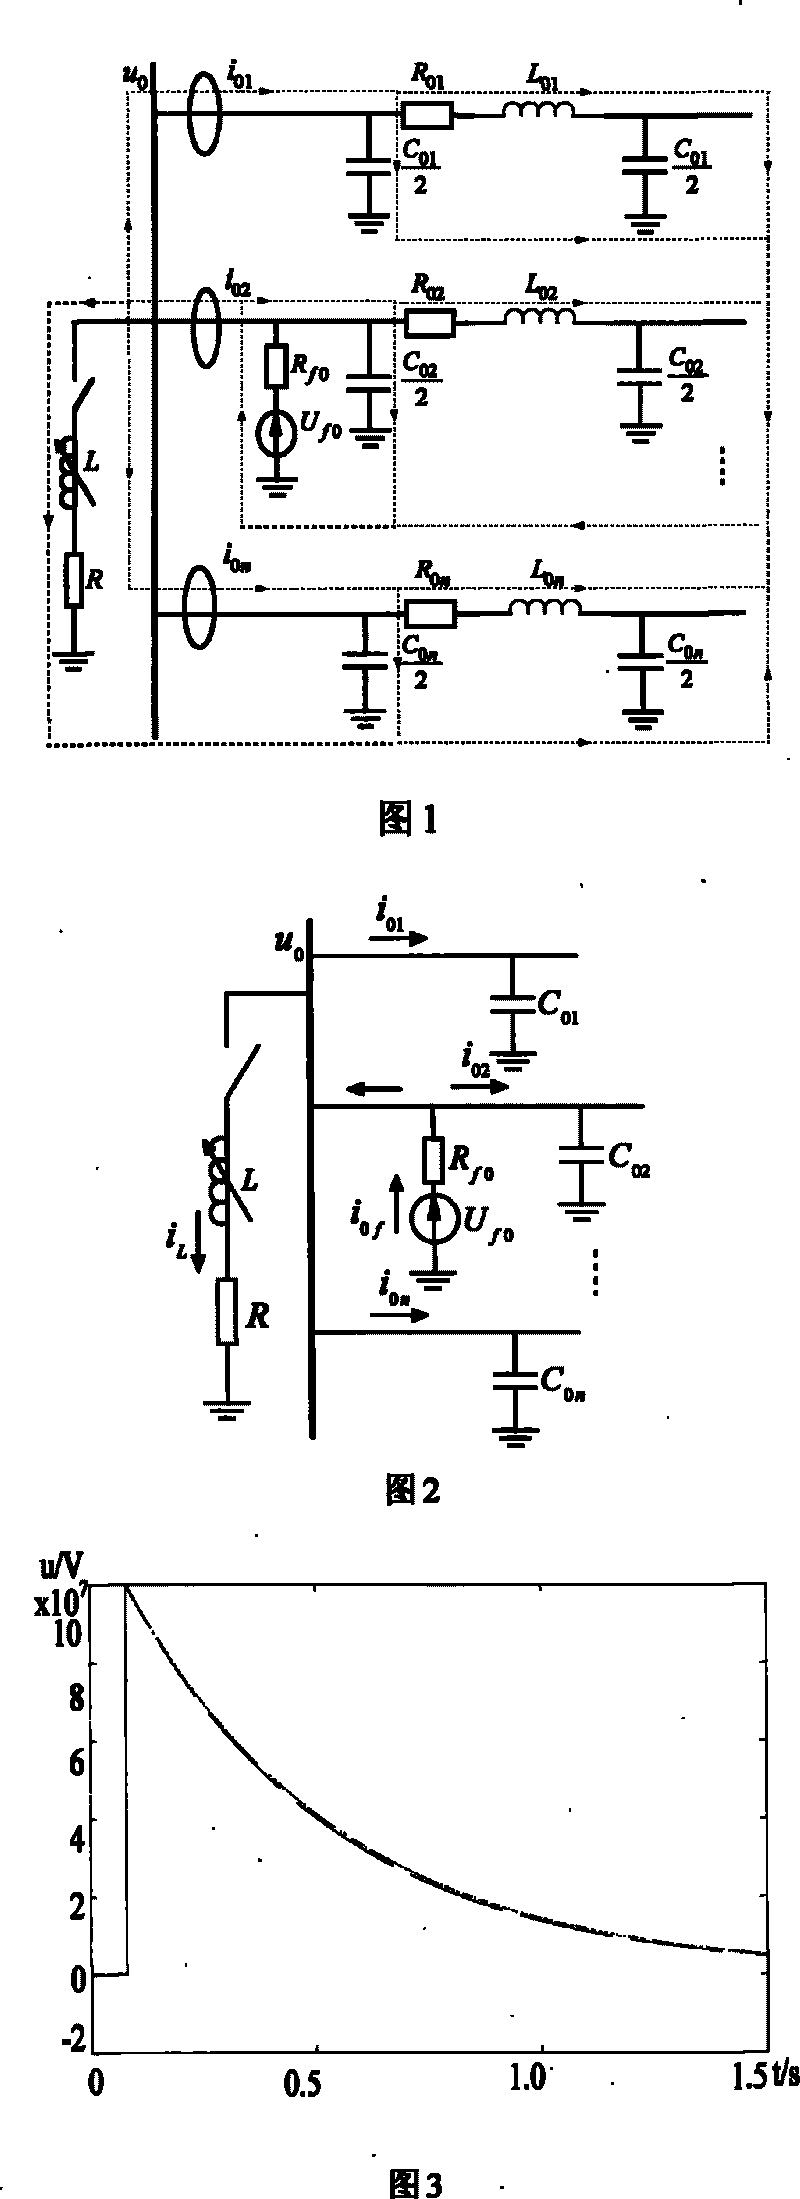 Test simulation method for failure line selection of small current ground system